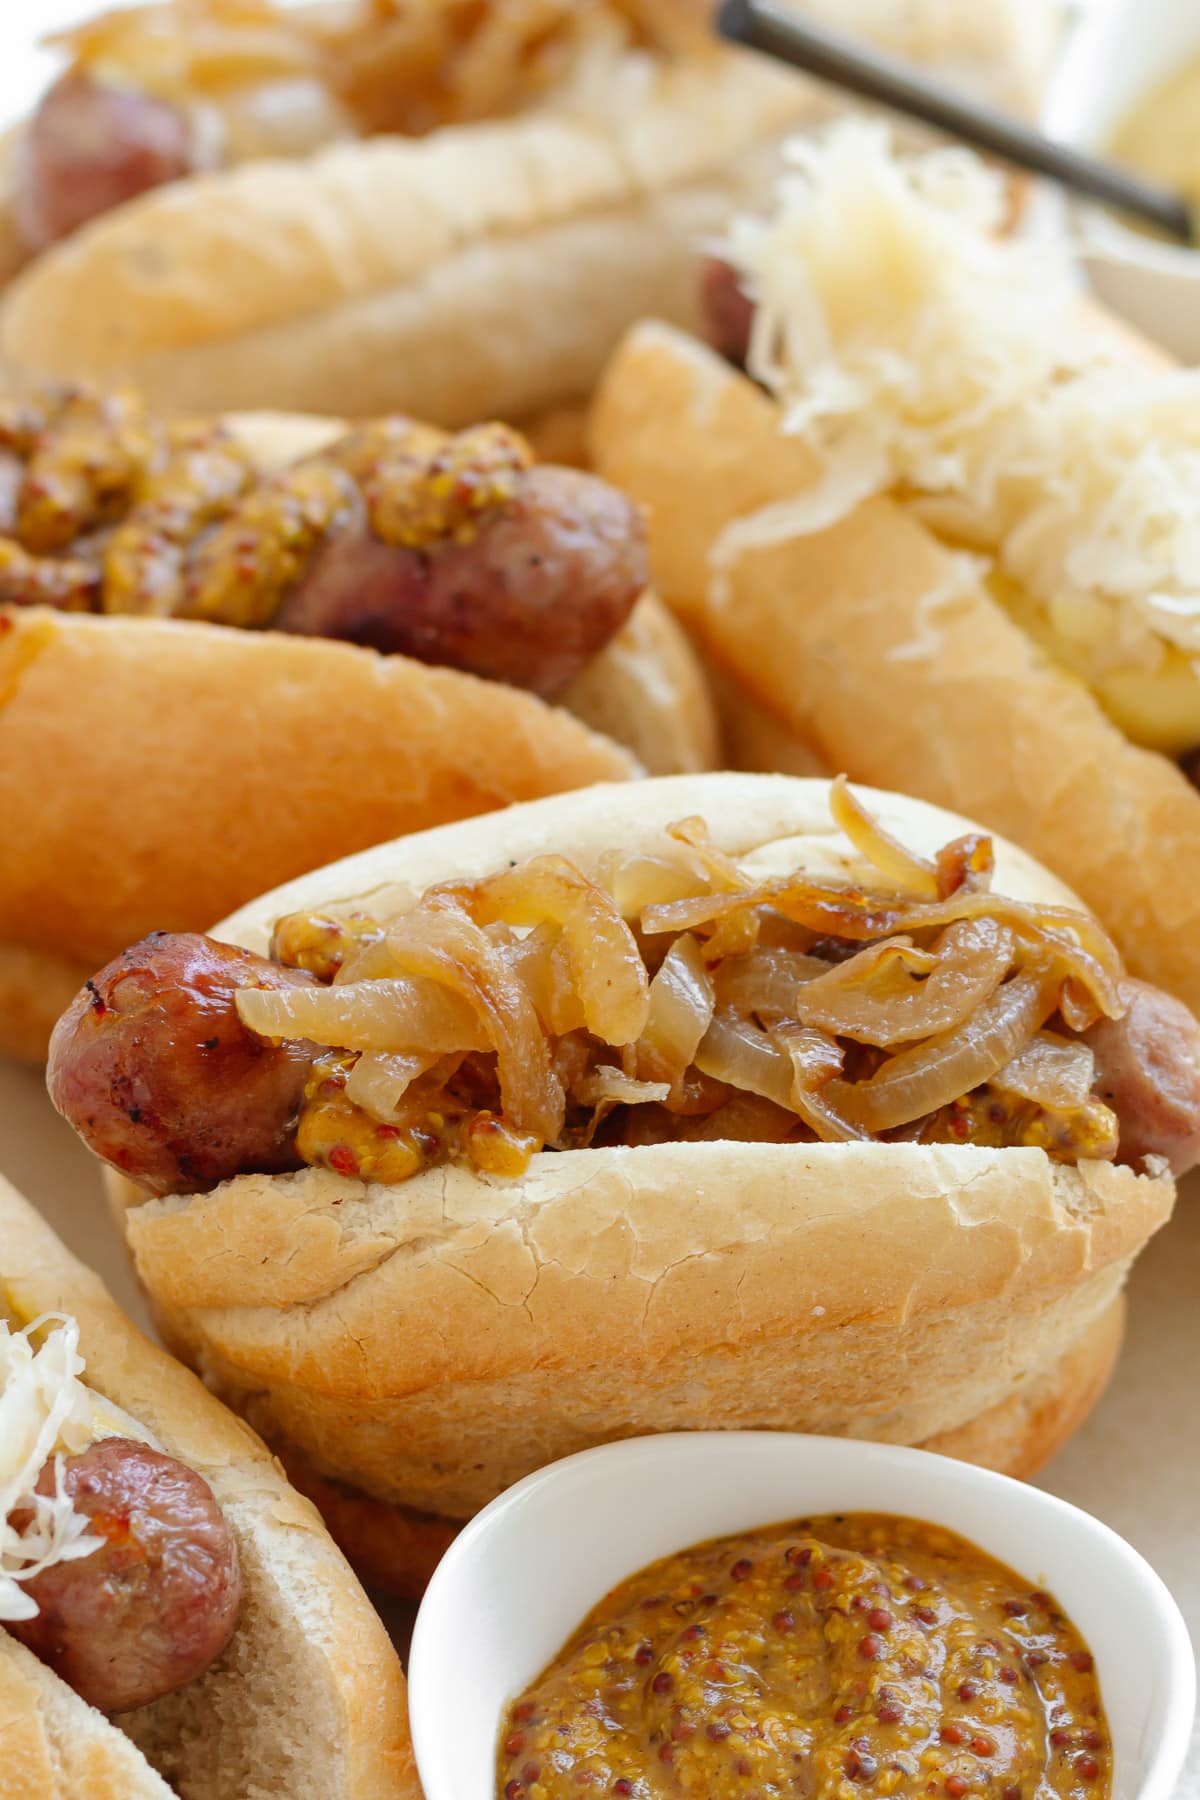 Grilled brats on buns with various toppings like mustard, beer braised onions and sauerkraut.